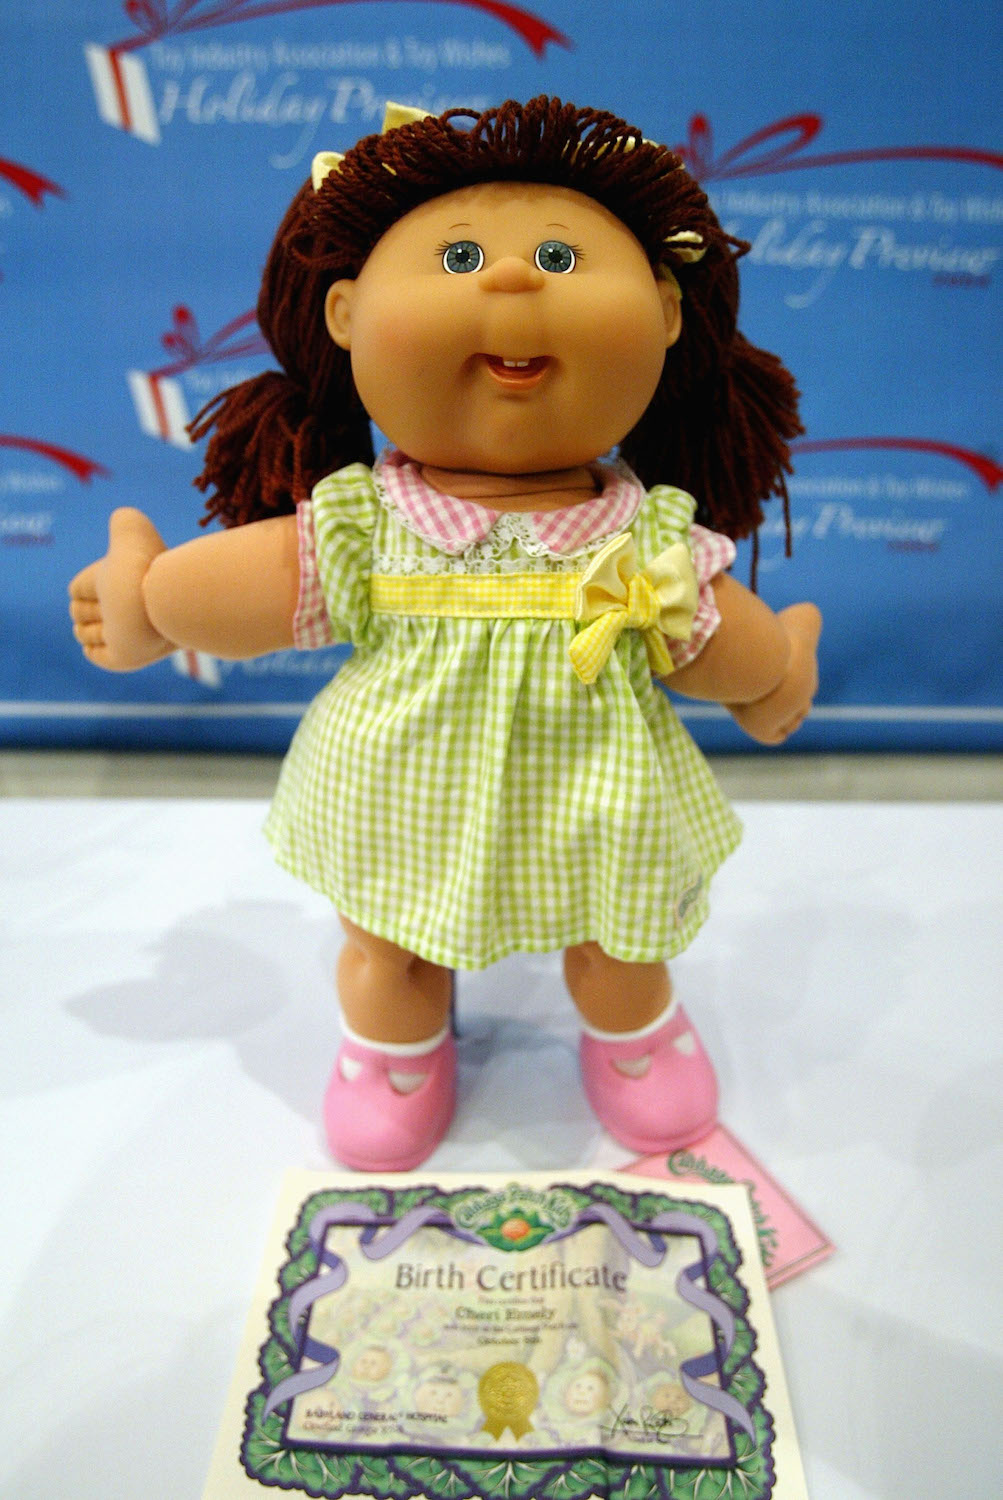 1985 cabbage patch doll value